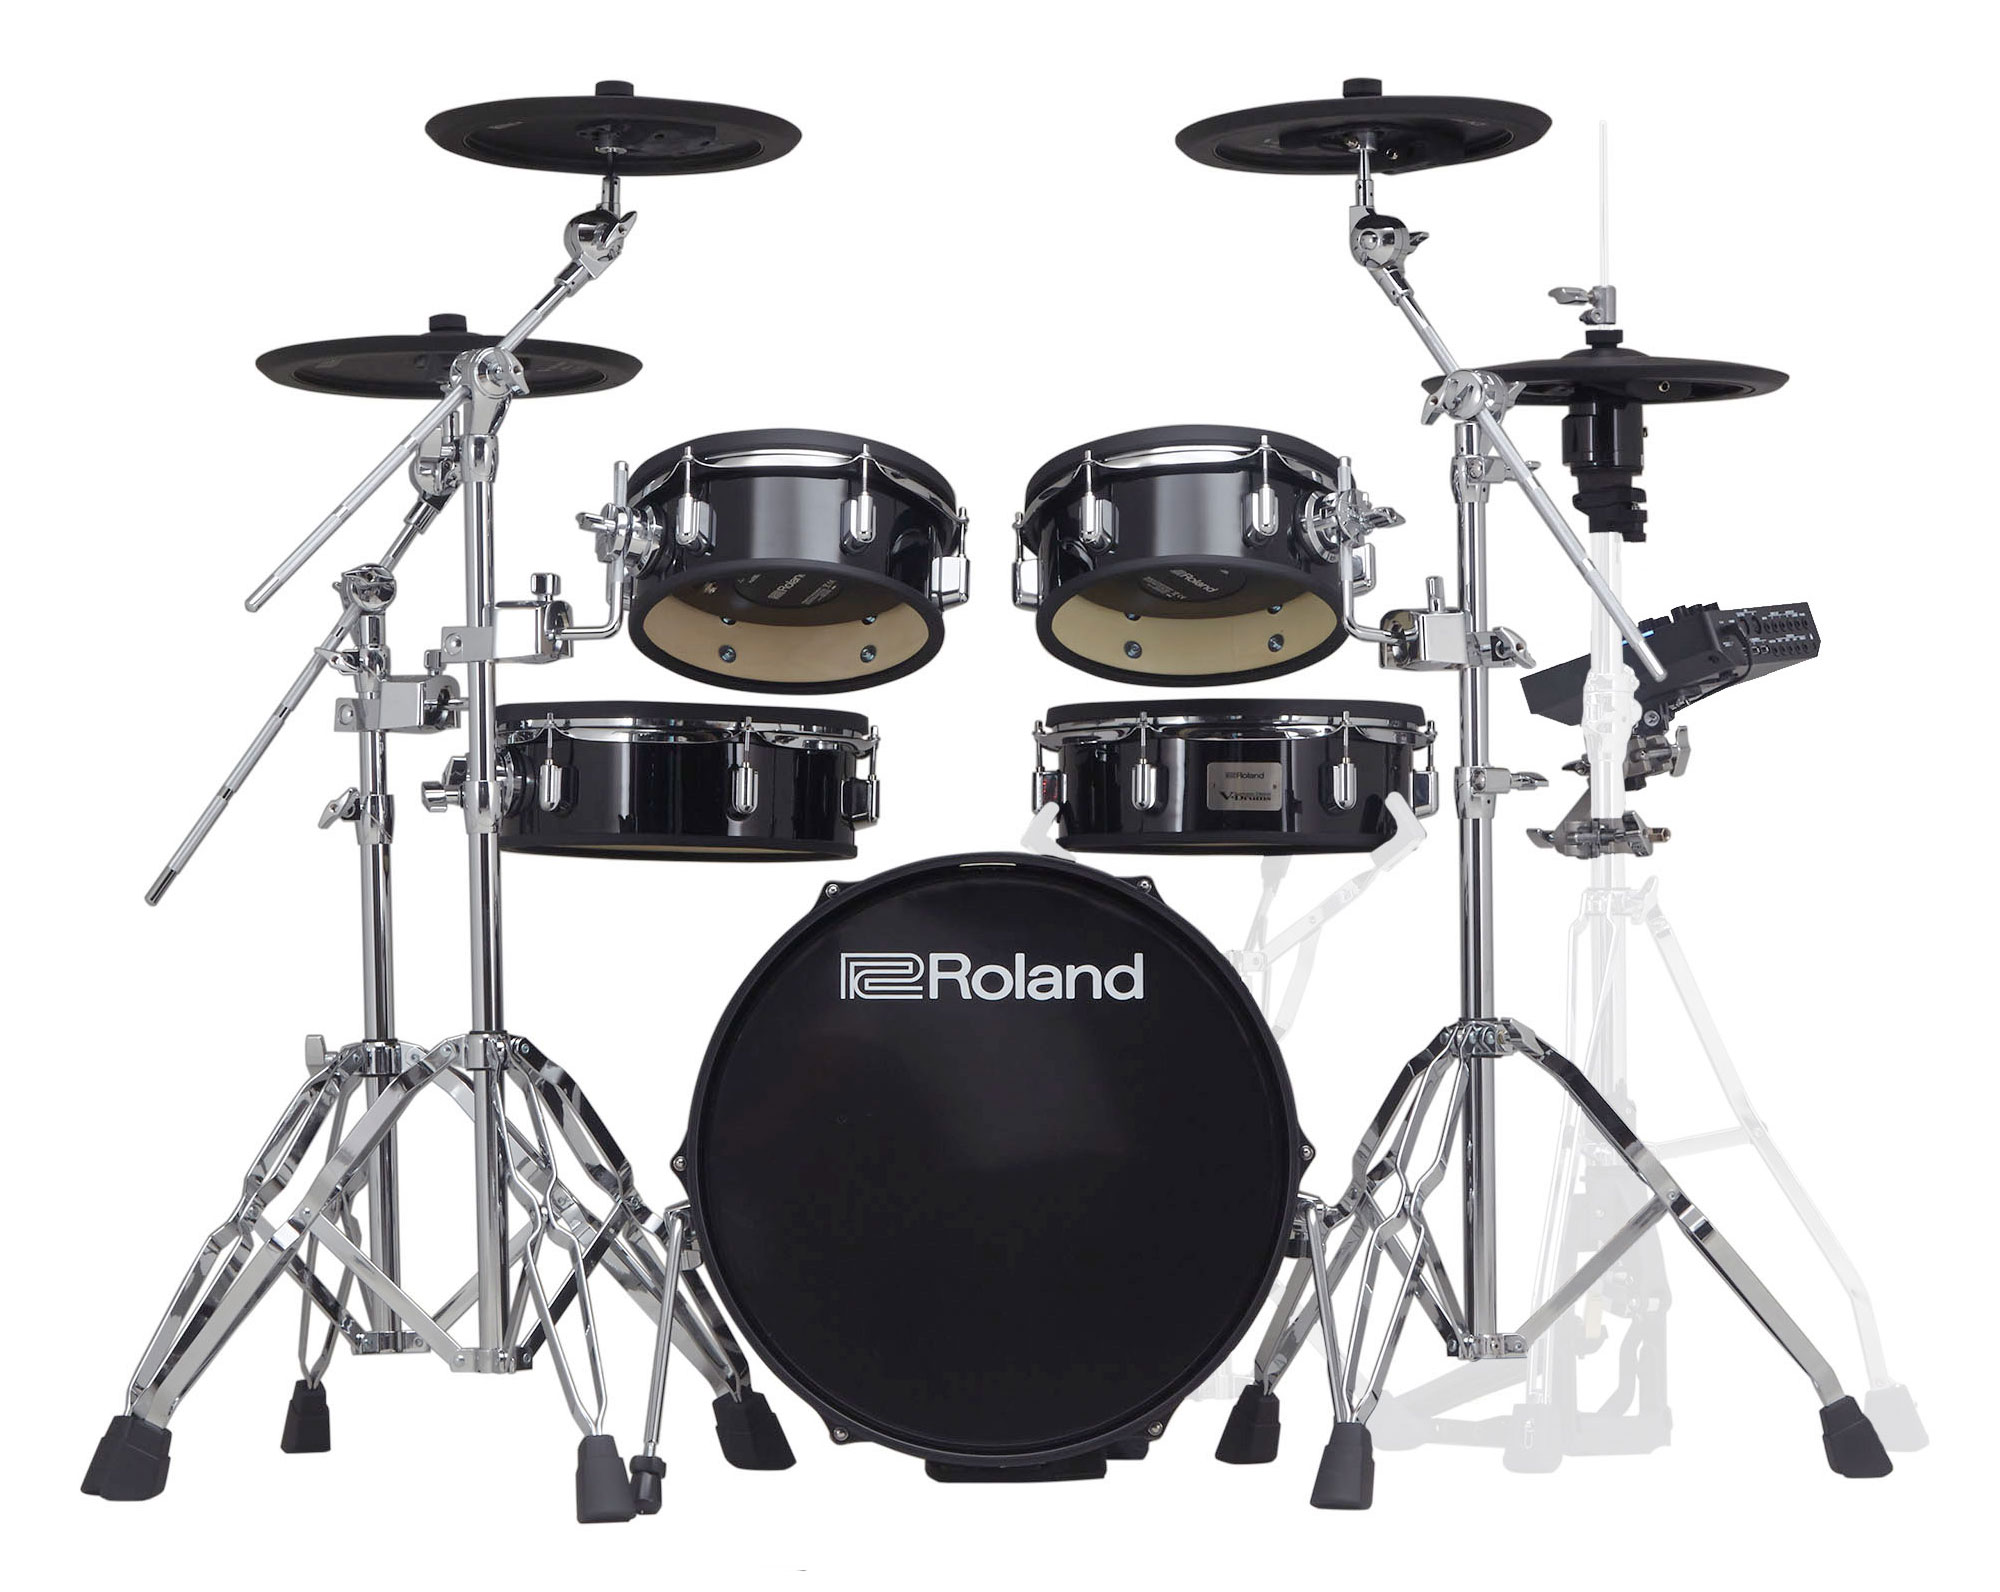 Roland VAD 3 Series | Products